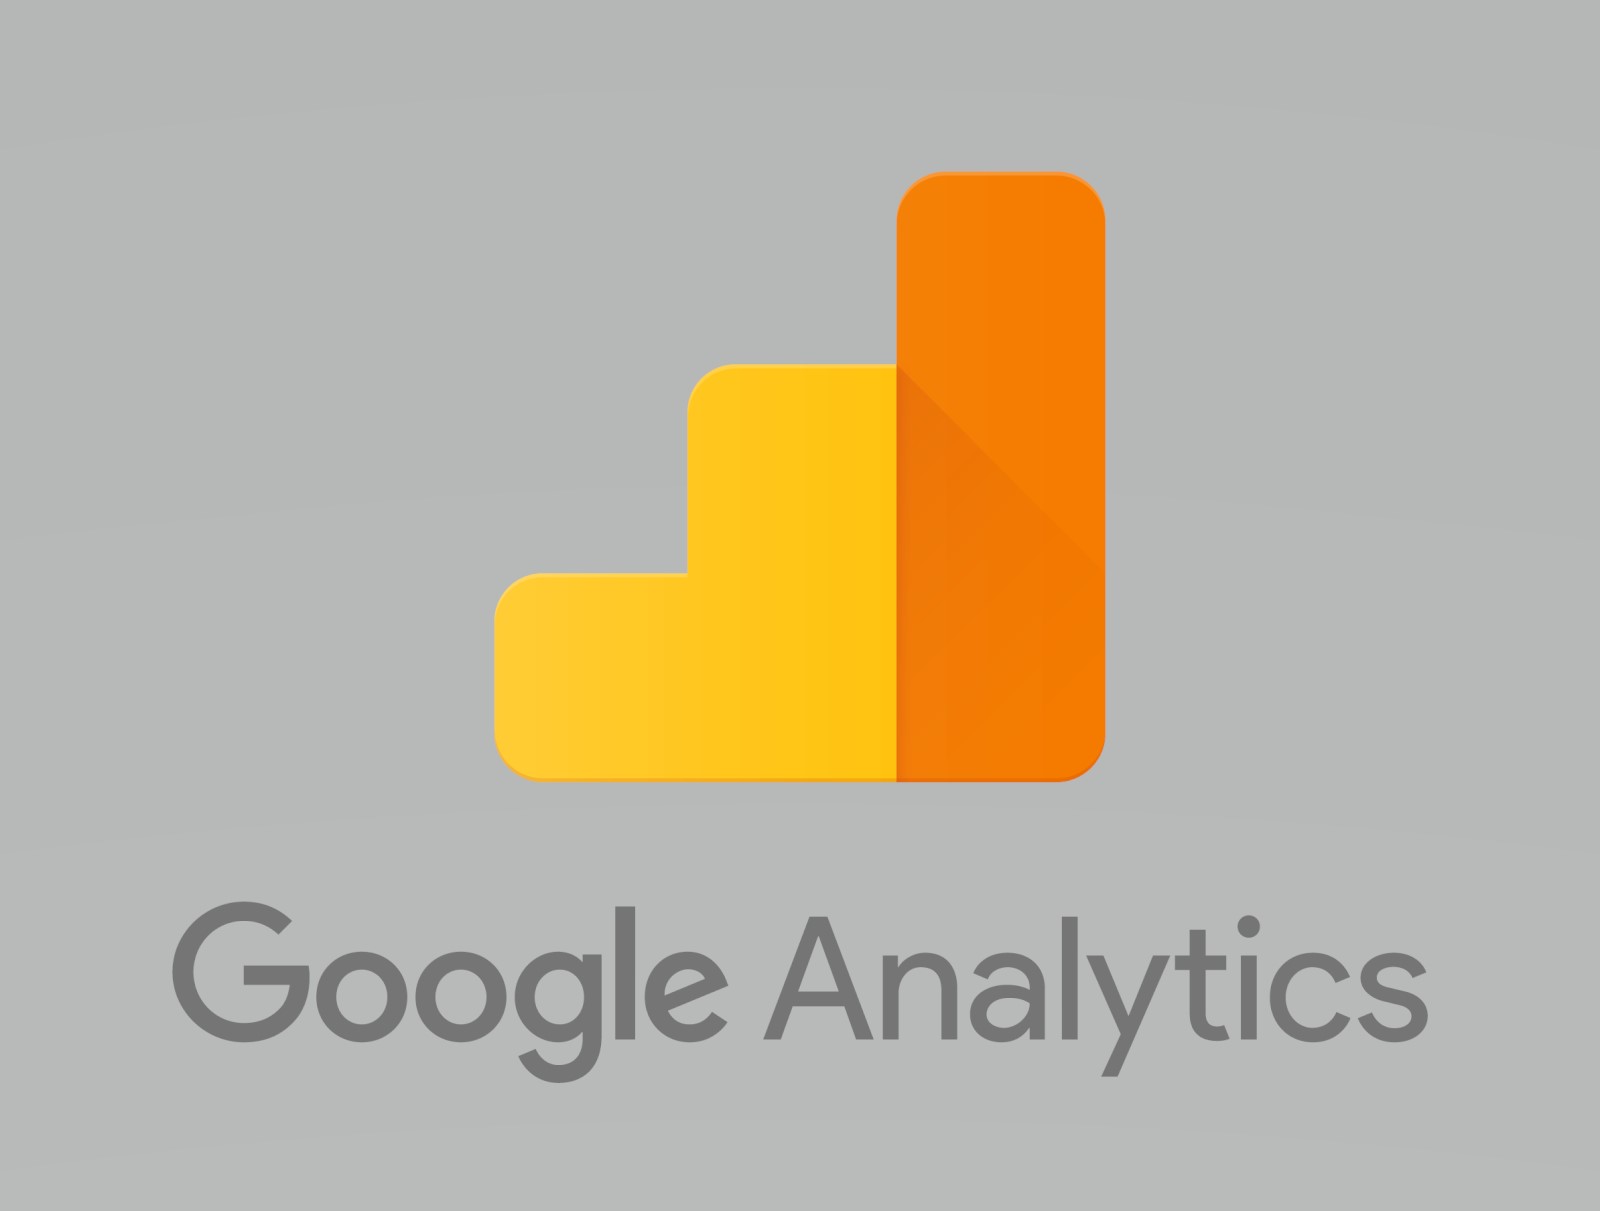 GeneralCommunications Cloud Services Google Analytics Boost Your SEO